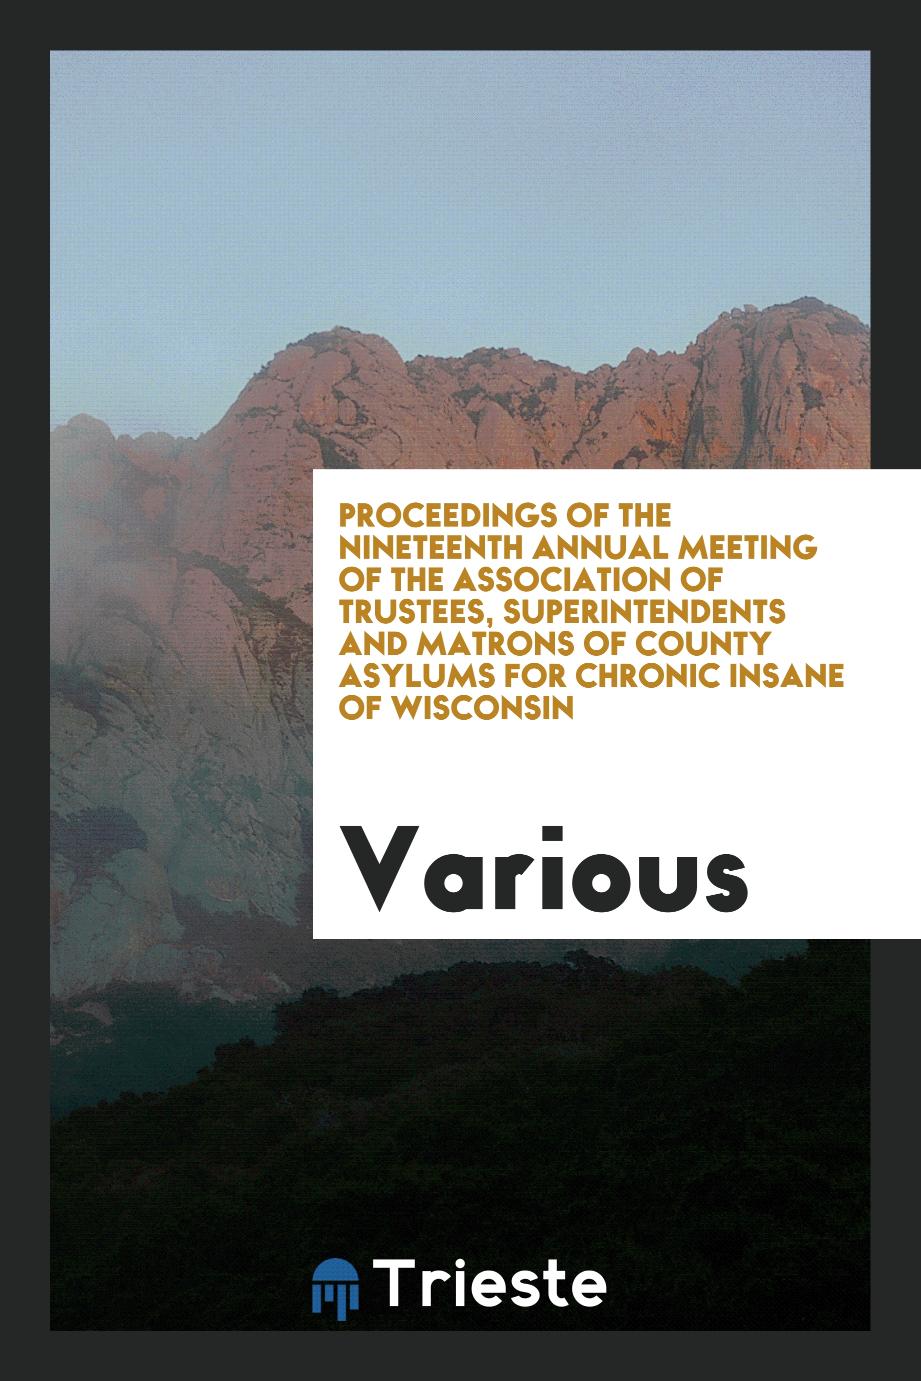 Proceedings of the nineteenth annual meeting of the Association of Trustees, Superintendents and Matrons of County Asylums for Chronic Insane of Wisconsin